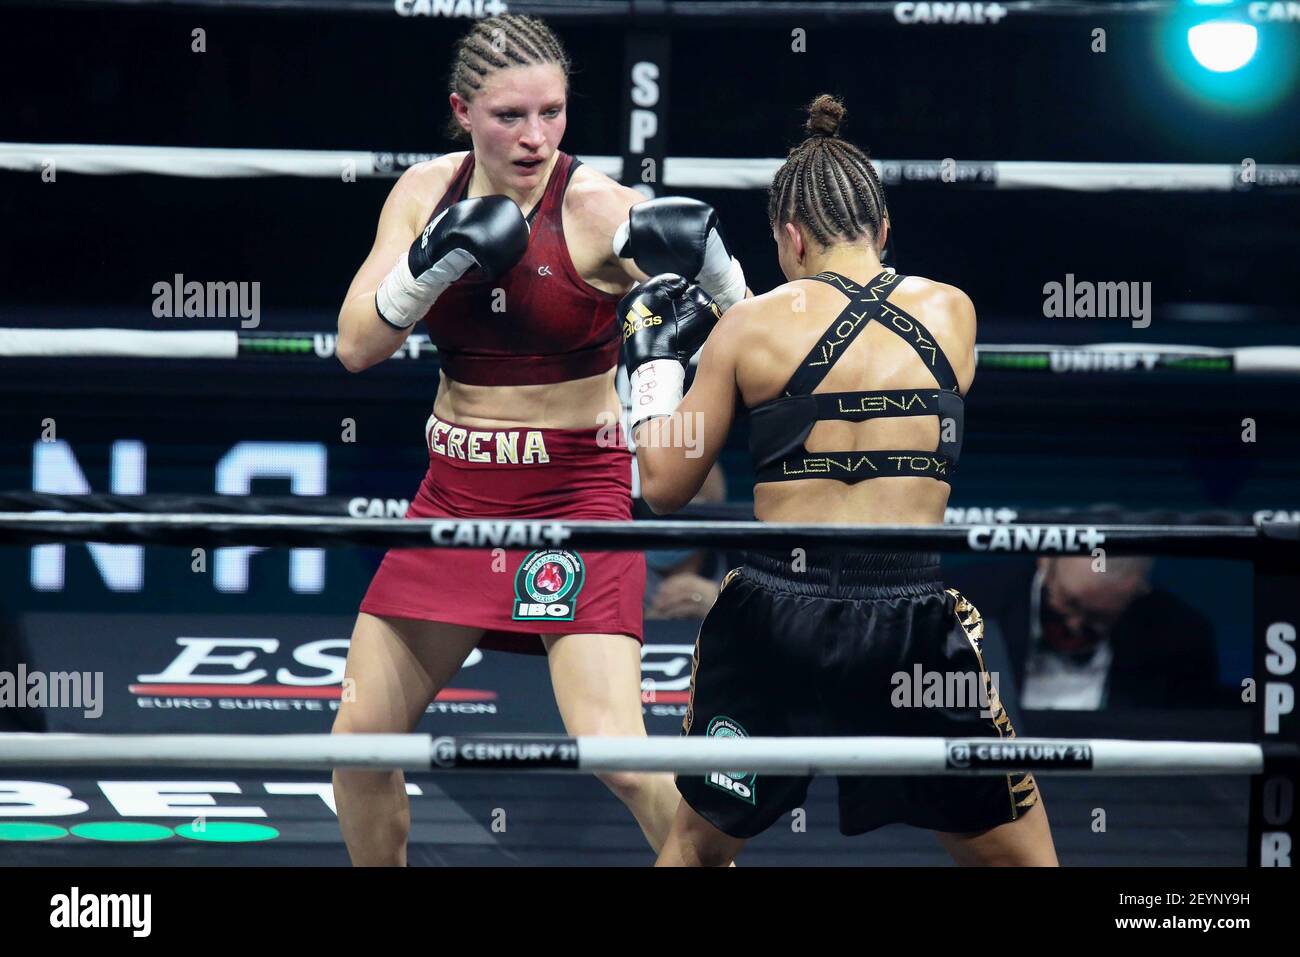 Nantes, France. 05th Mar, 2021. Verena Kaiser of Germany and Estelle  Yoka-Mossely of France during the IBO Lightweight World championship boxing  event between Estelle Mossely-Yoka and Verena Kaiser on March 5, 2021